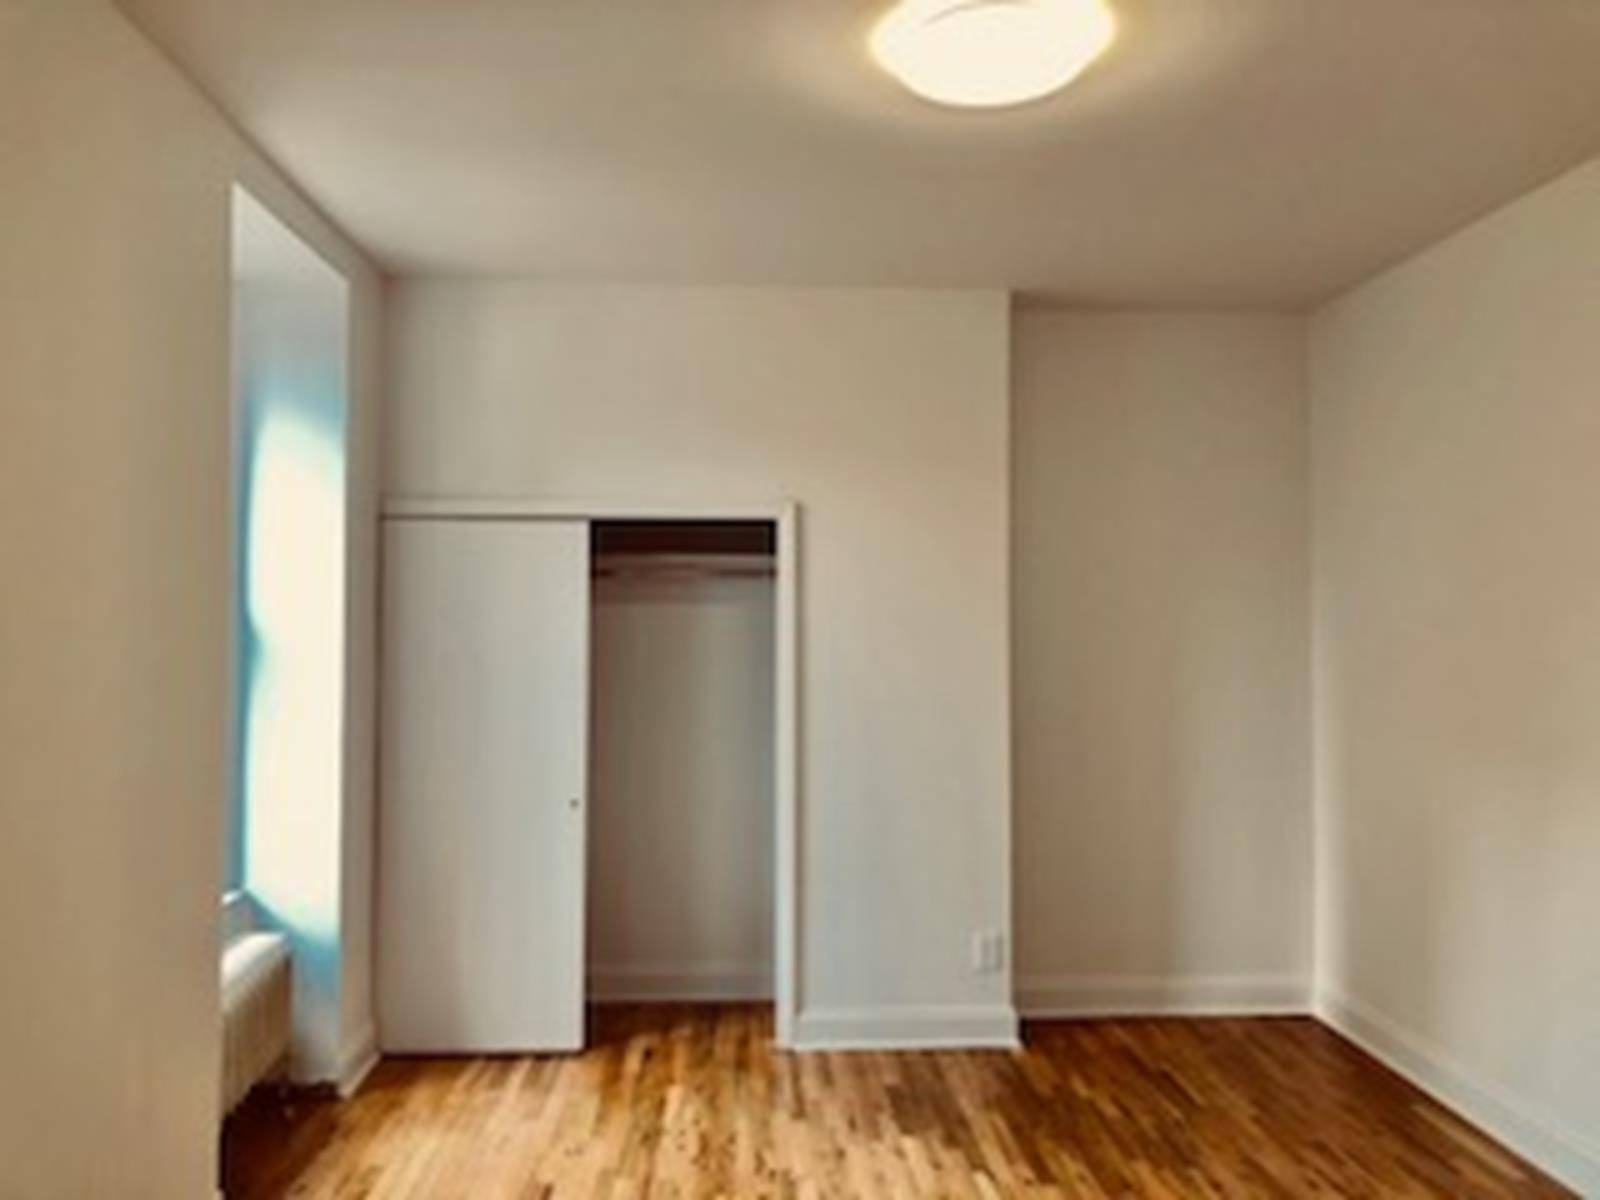 THE APARTMENT Spacious studio apartment with open city or garden views High ceilings and good closet space Hardwood flooring throughout Modern windowed kitchenette amp ; modern bathroom Kitchen in process ...